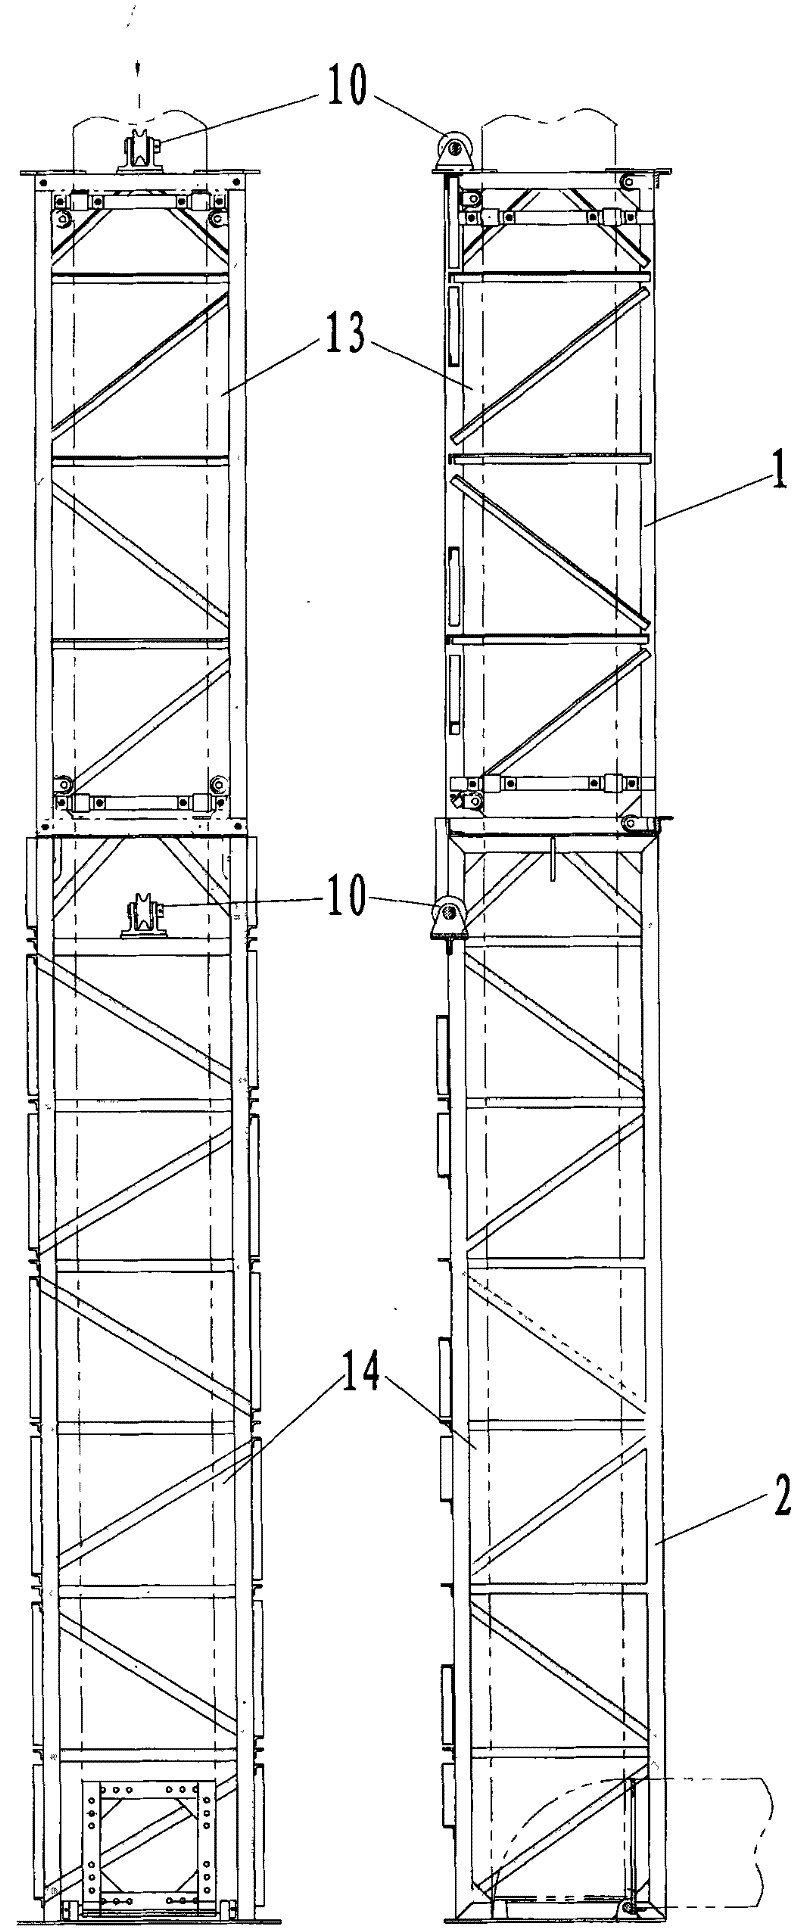 Device and method for mounting upright post of spanning frame